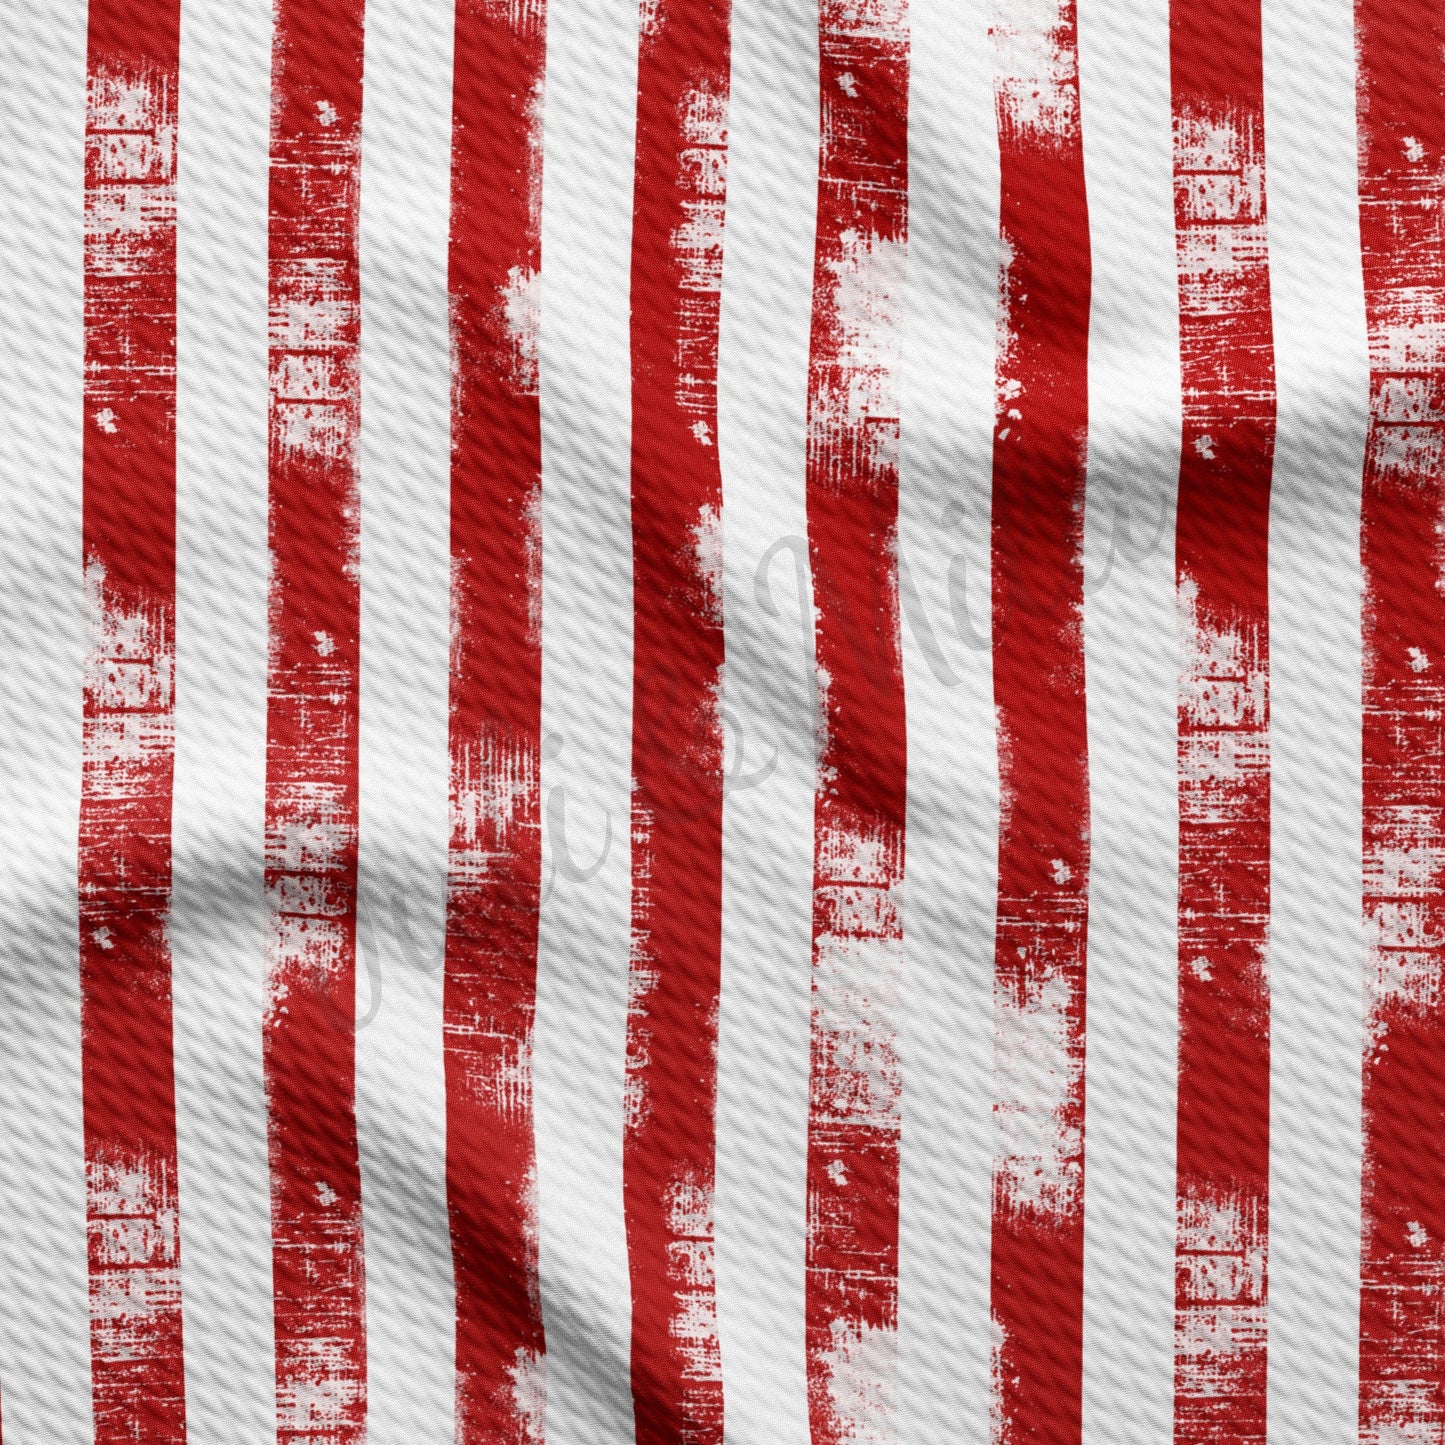 Vertical Distressed Stripes Patriotic 4th of July Fabric PT96